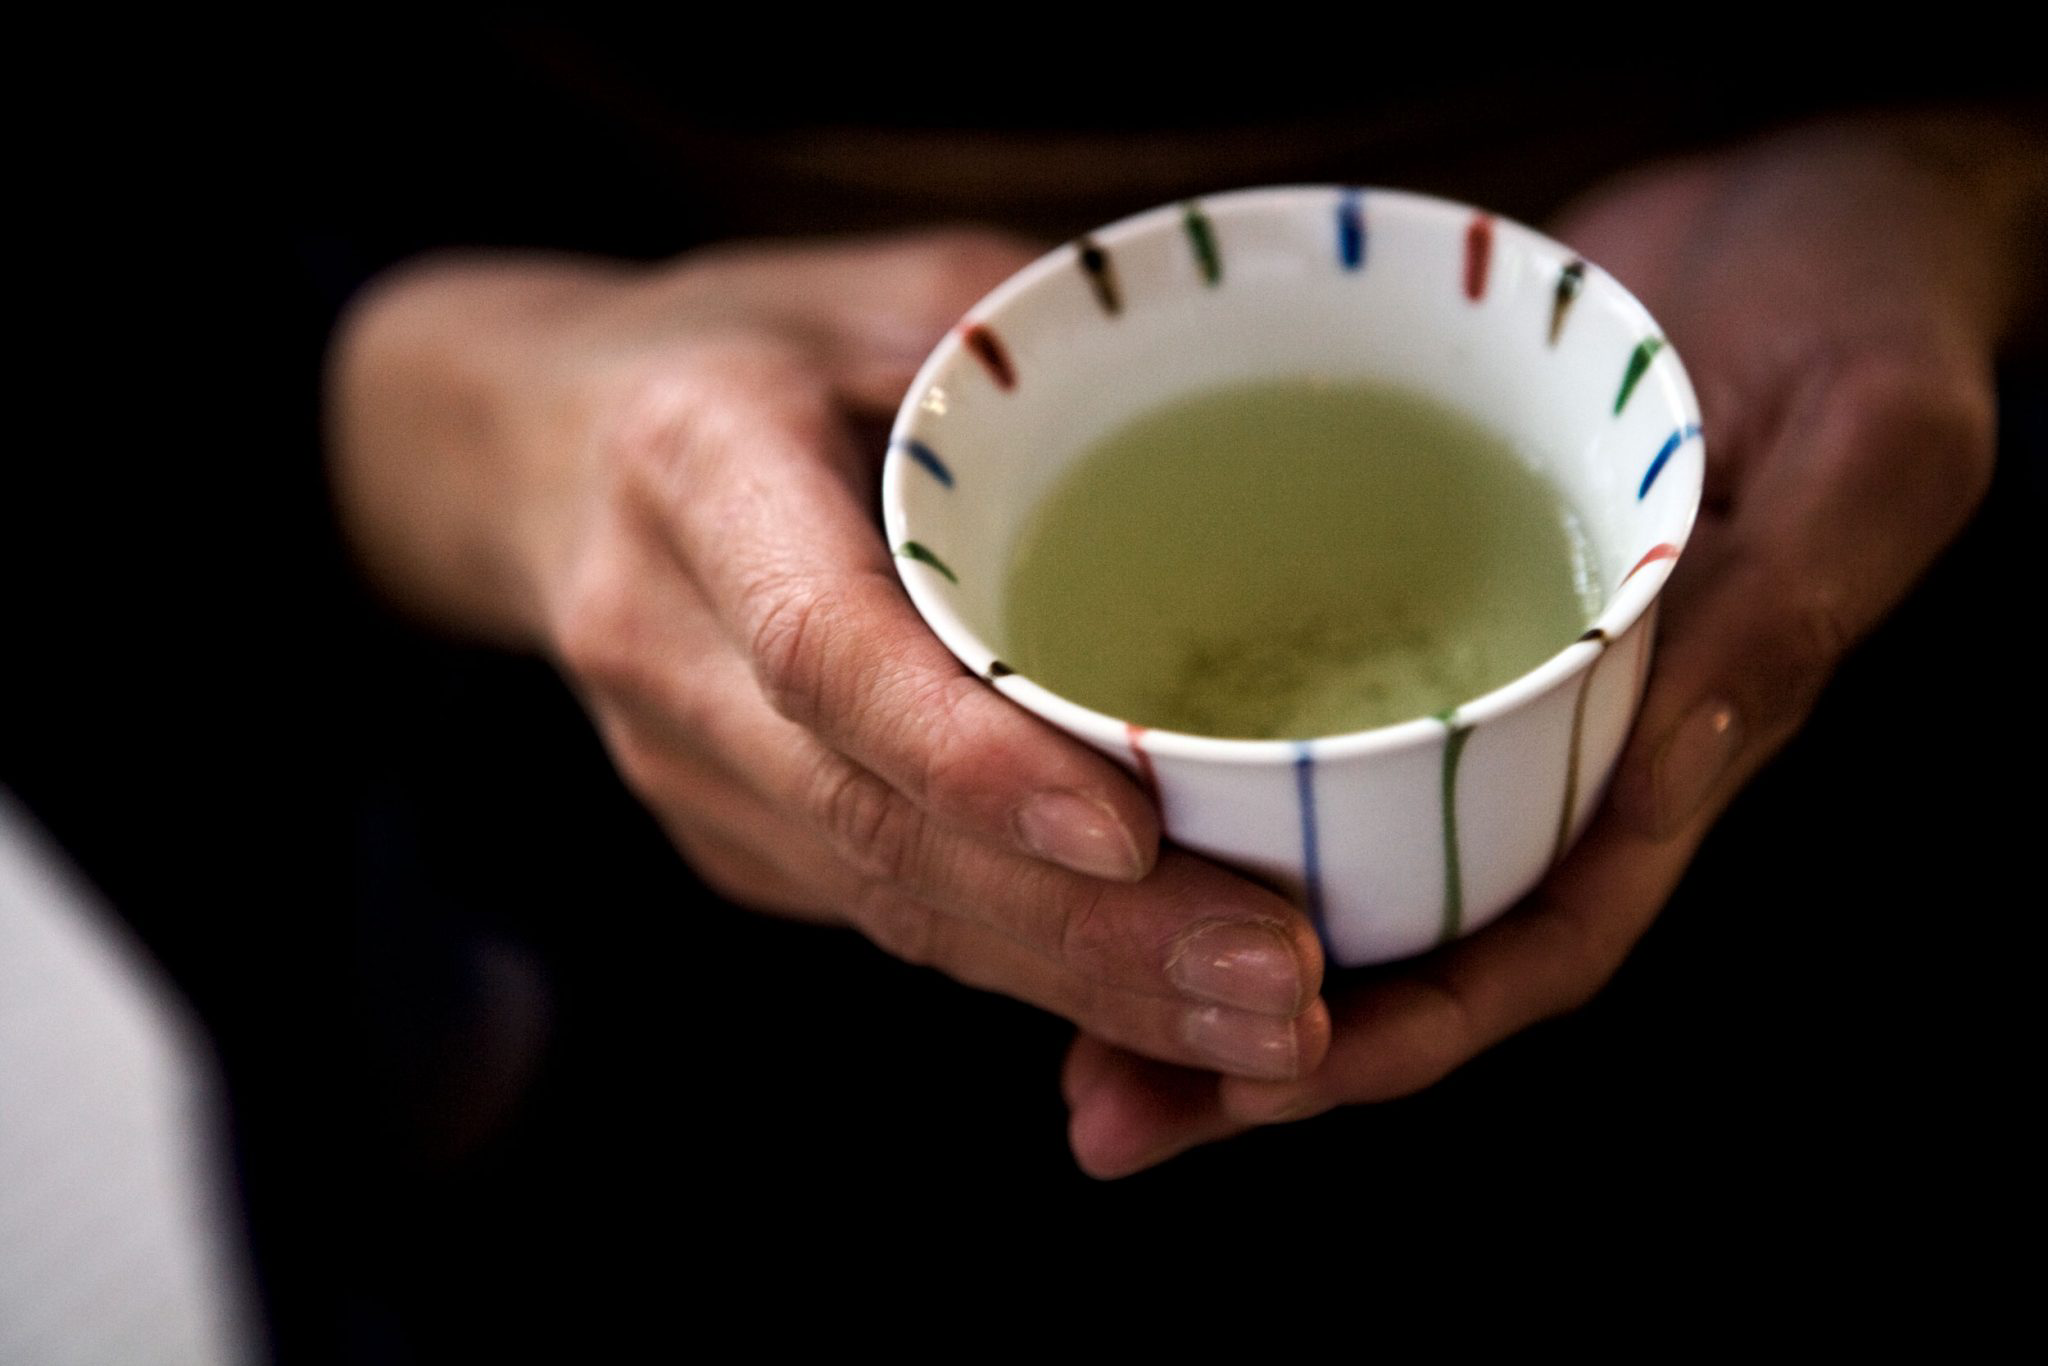 Calm hands holding a small ceramic cup filled with green tea.